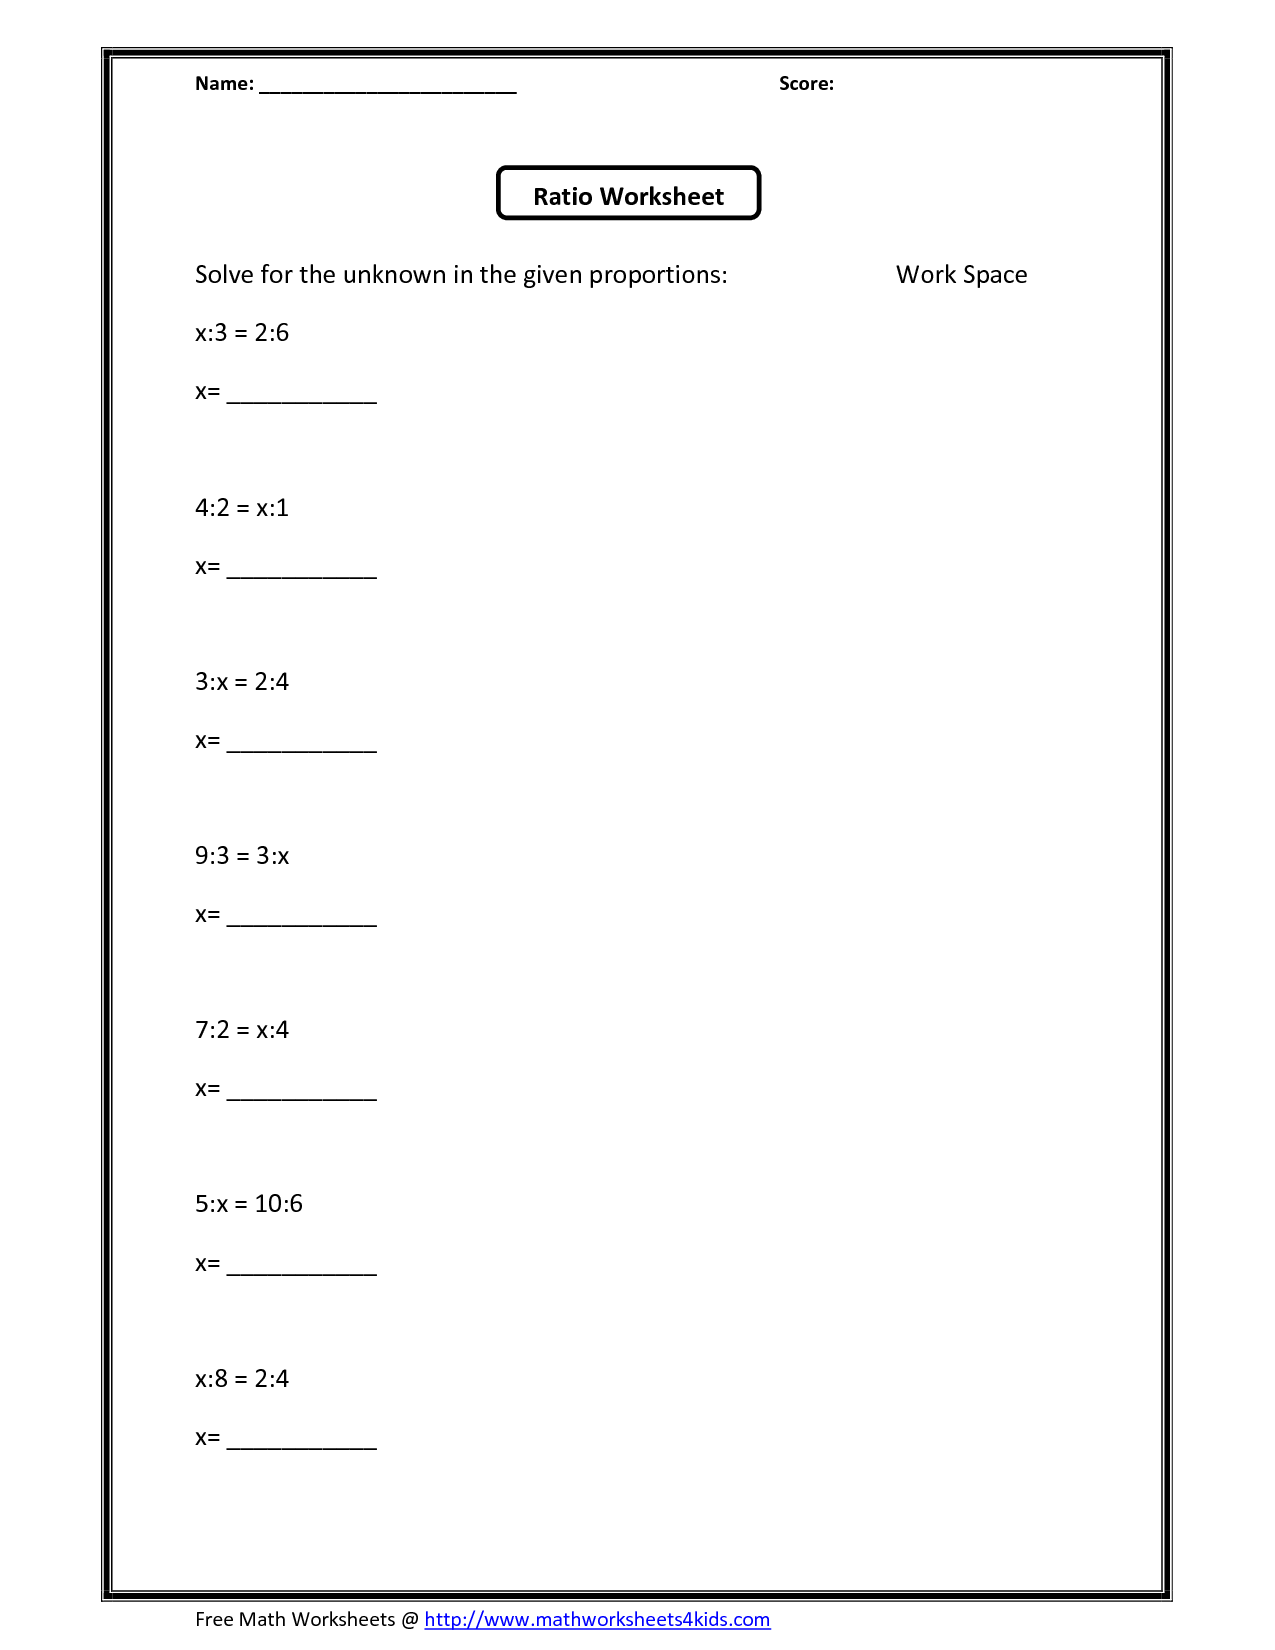 ratio-and-proportion-printable-worksheets